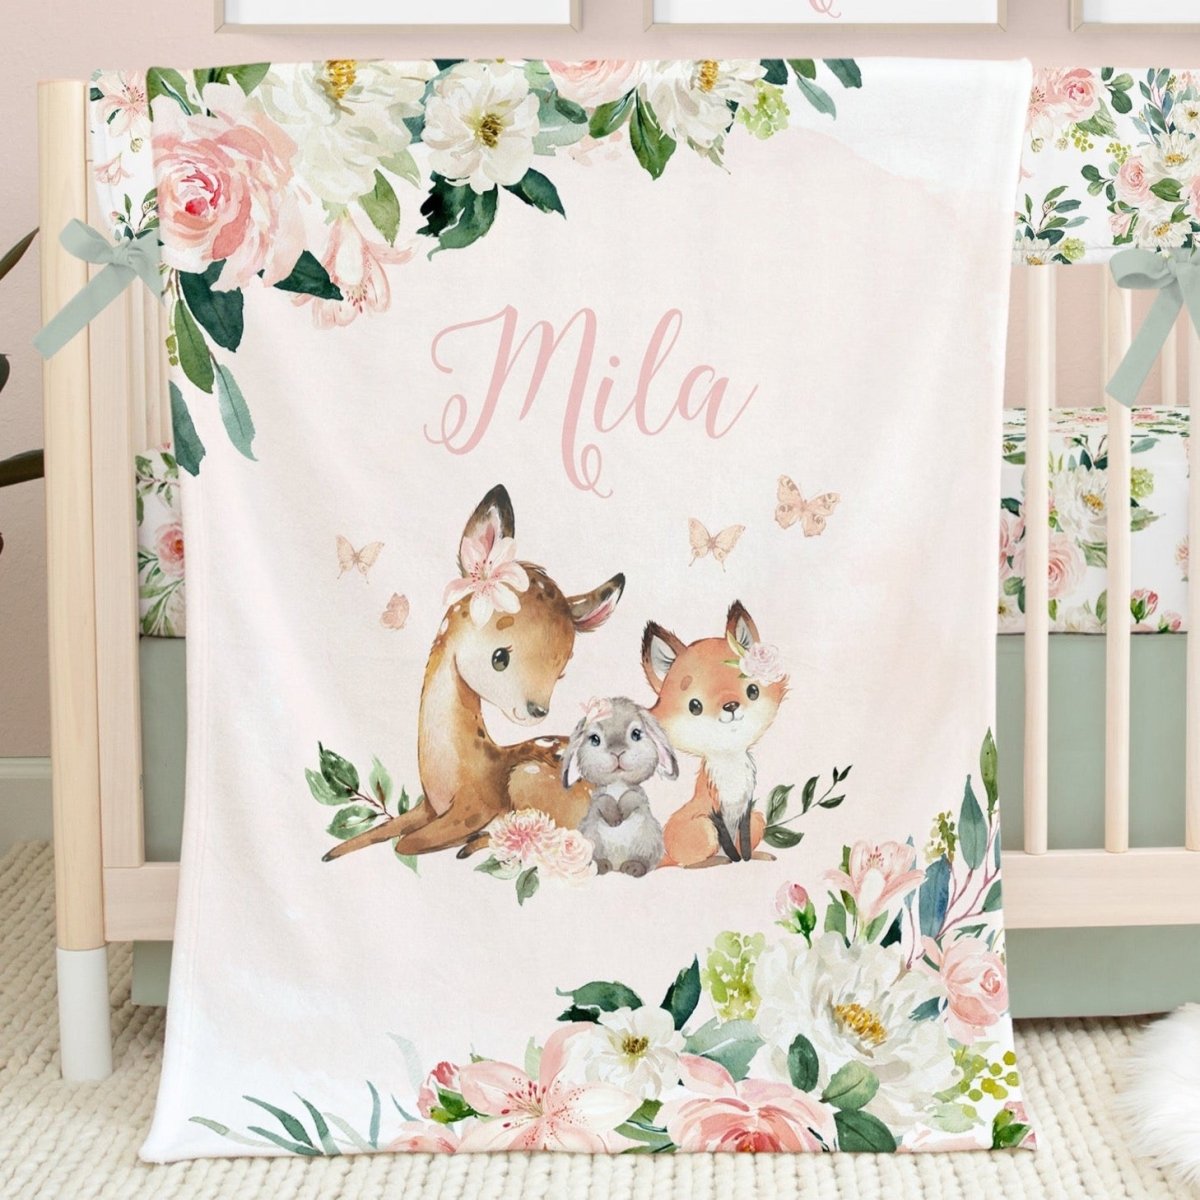 Woodland Meadows Personalized Minky Blanket - gender_girl, Personalized_Yes, text